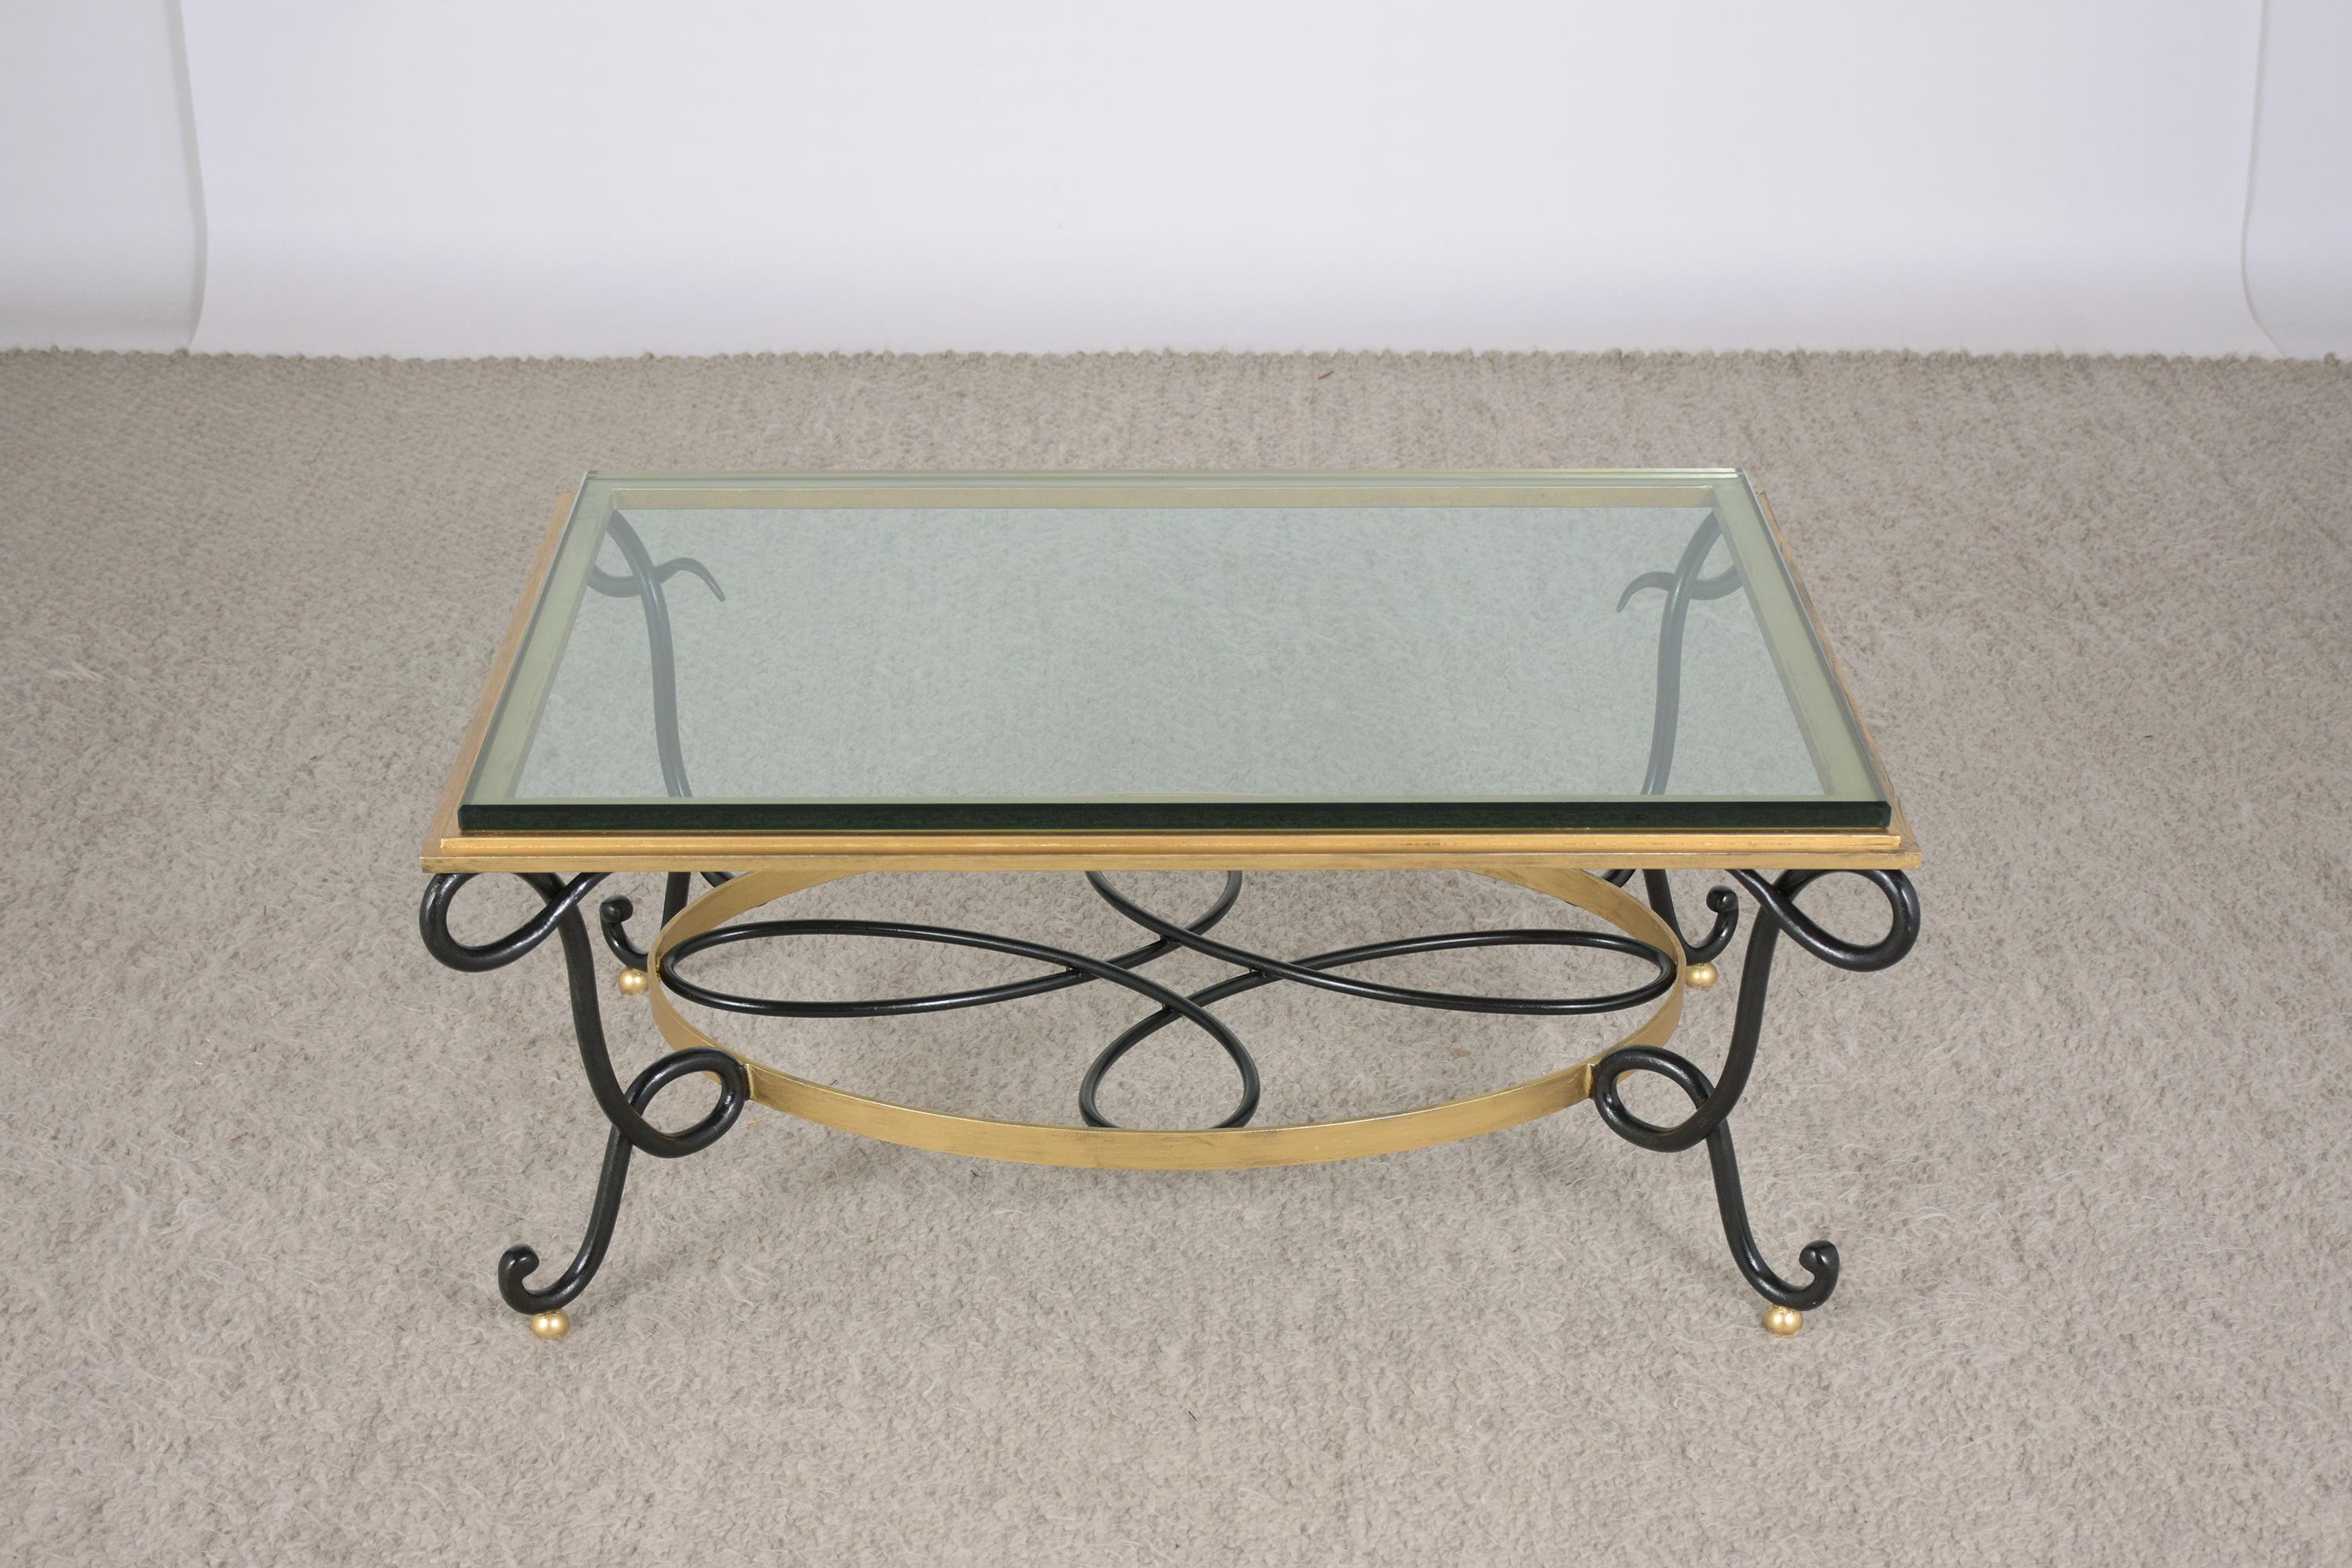 This 1960s mid-century modern iron glass top coffee table hand-crafted out of wrought iron has been newly restored by our team of expert craftsmen. The table features its original 3/4 inch thick glass top with a beveled edge and rests on a sturdy